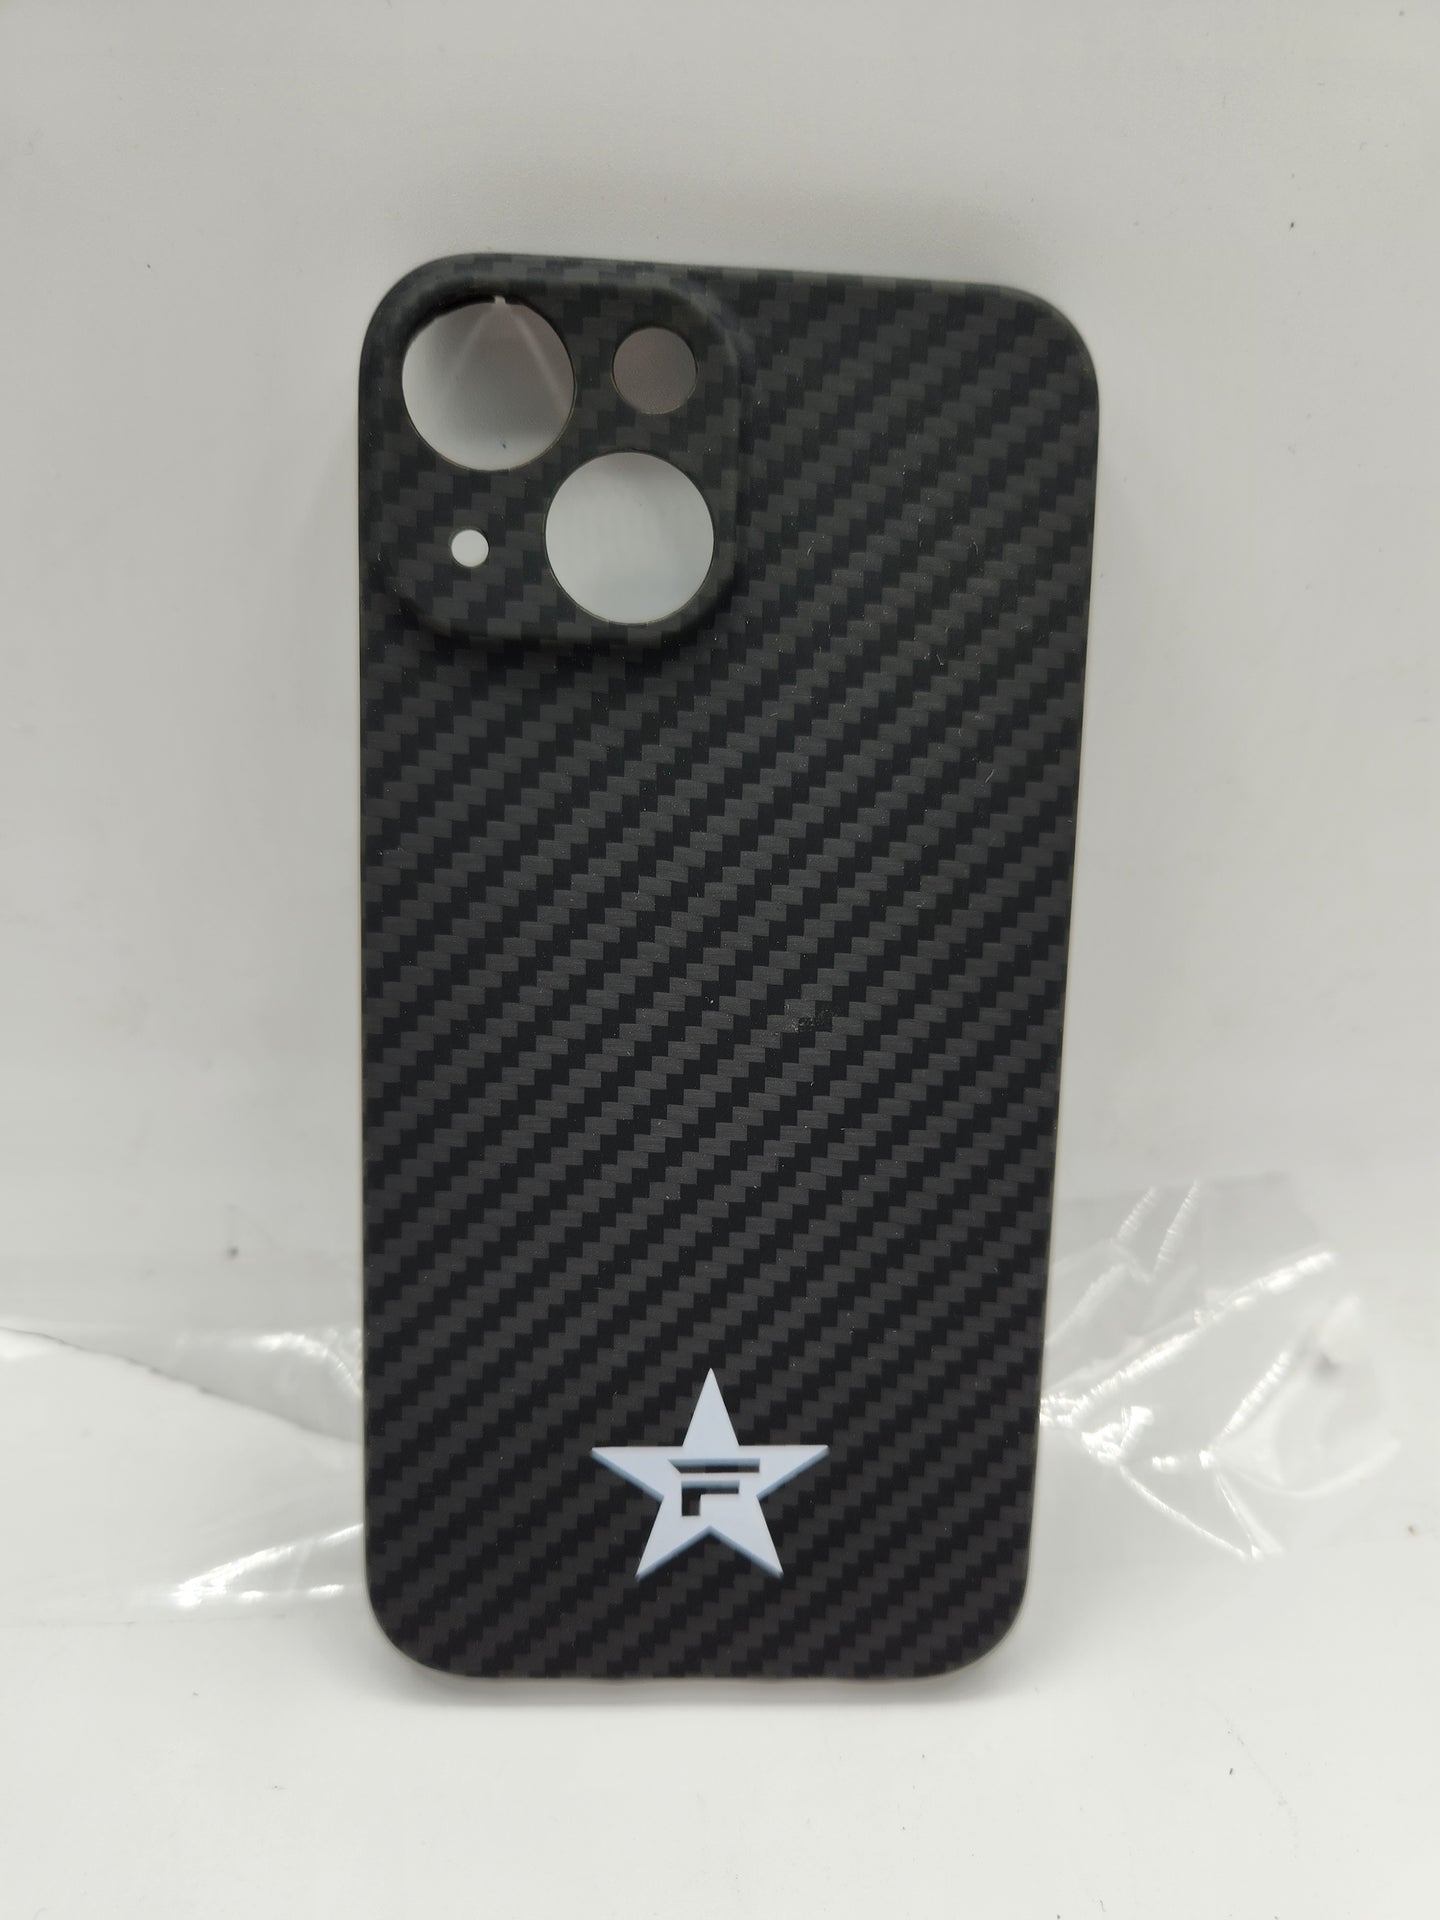 IPHONE CASES WITH STAR LOGO